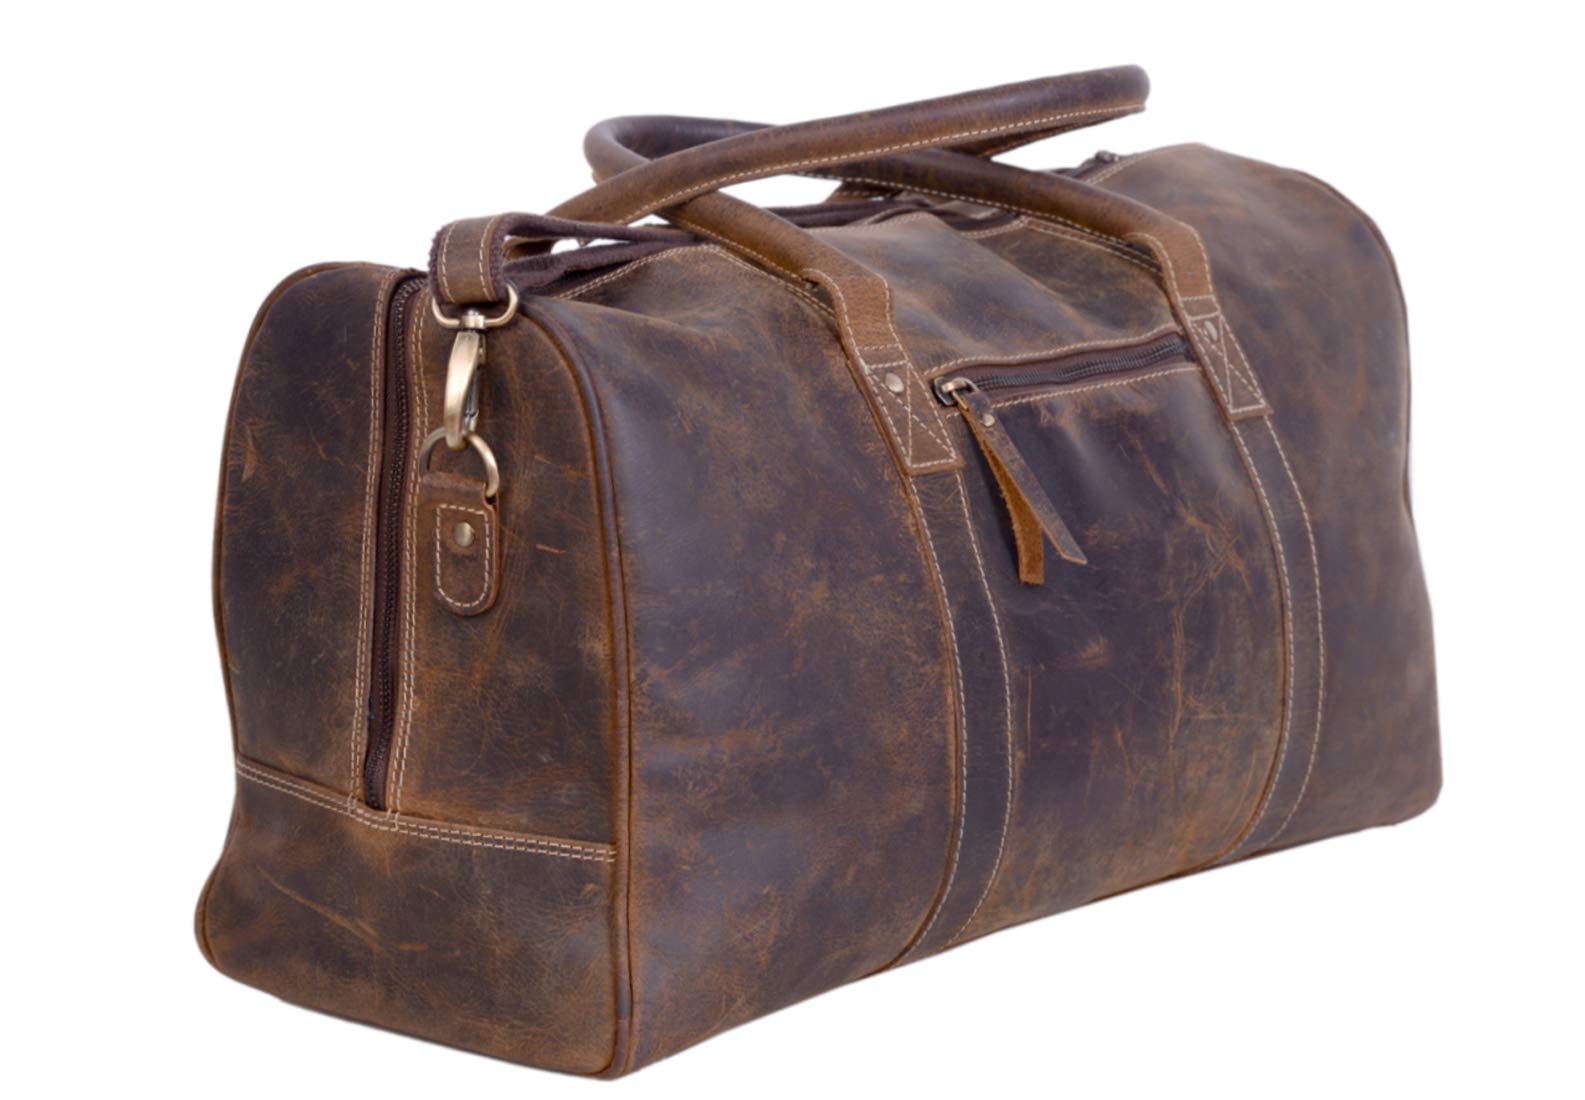 Leather Duffel Bags - Order Luxury Duffle Bags & High-End Leather Duffles  at Ghurka